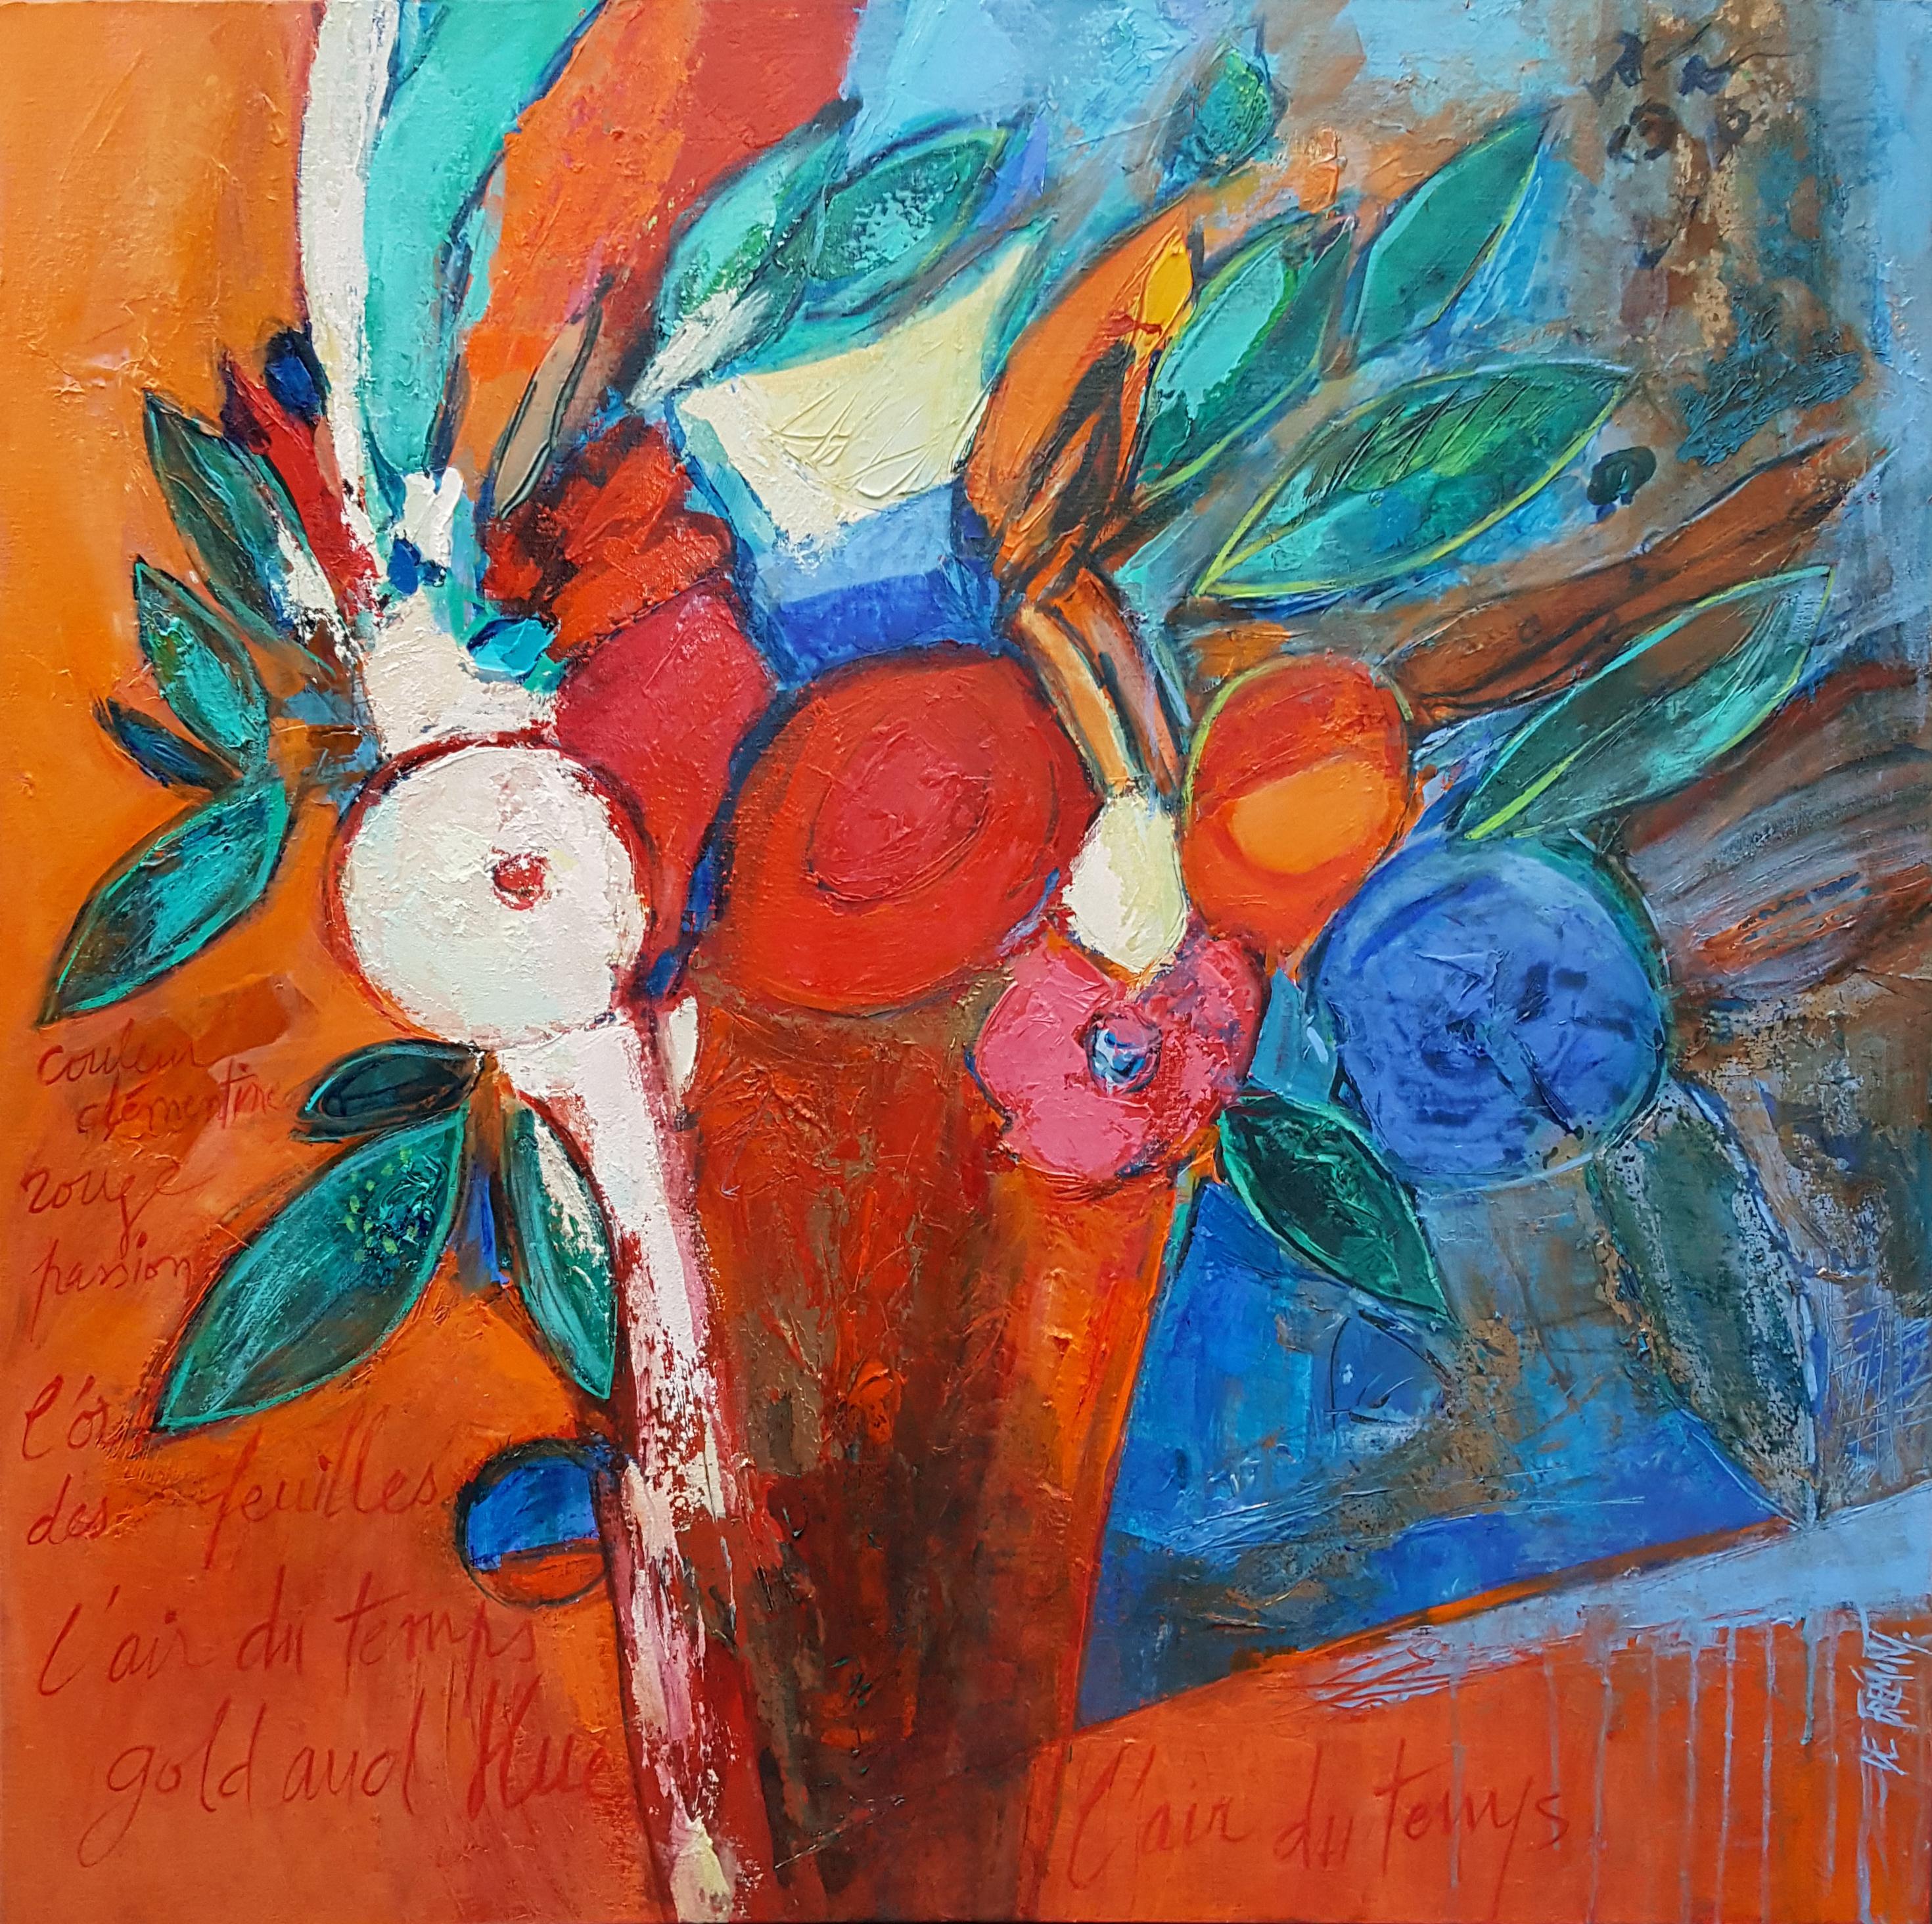 "Mood of the times", Blue Oranges Empowering Floral Bouquet Abstract Painting